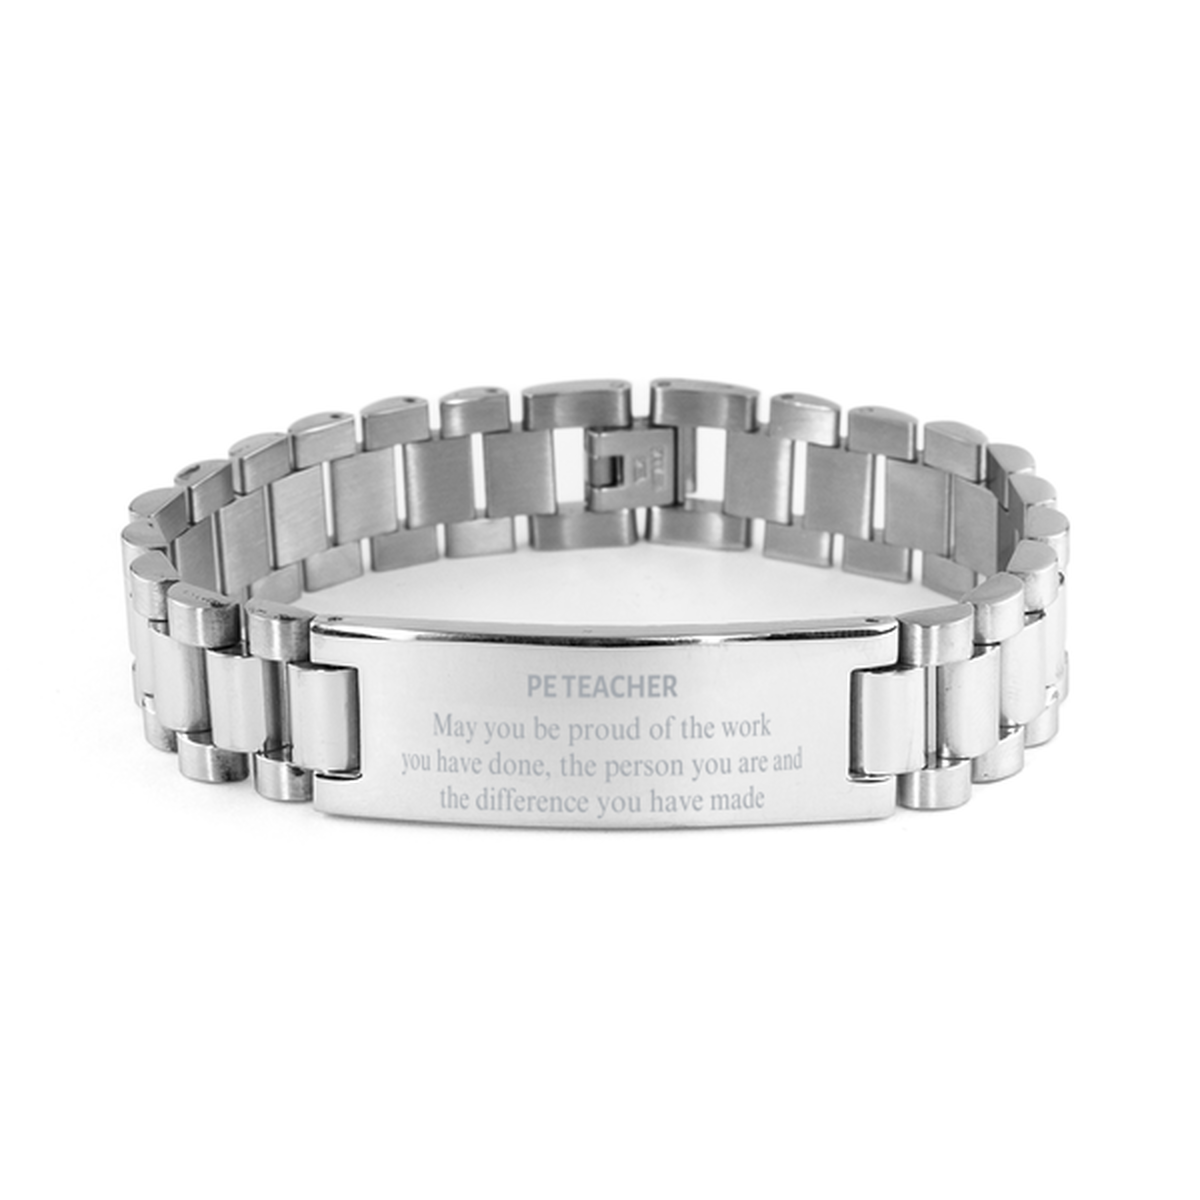 PE Teacher May you be proud of the work you have done, Retirement PE Teacher Ladder Stainless Steel Bracelet for Colleague Appreciation Gifts Amazing for PE Teacher